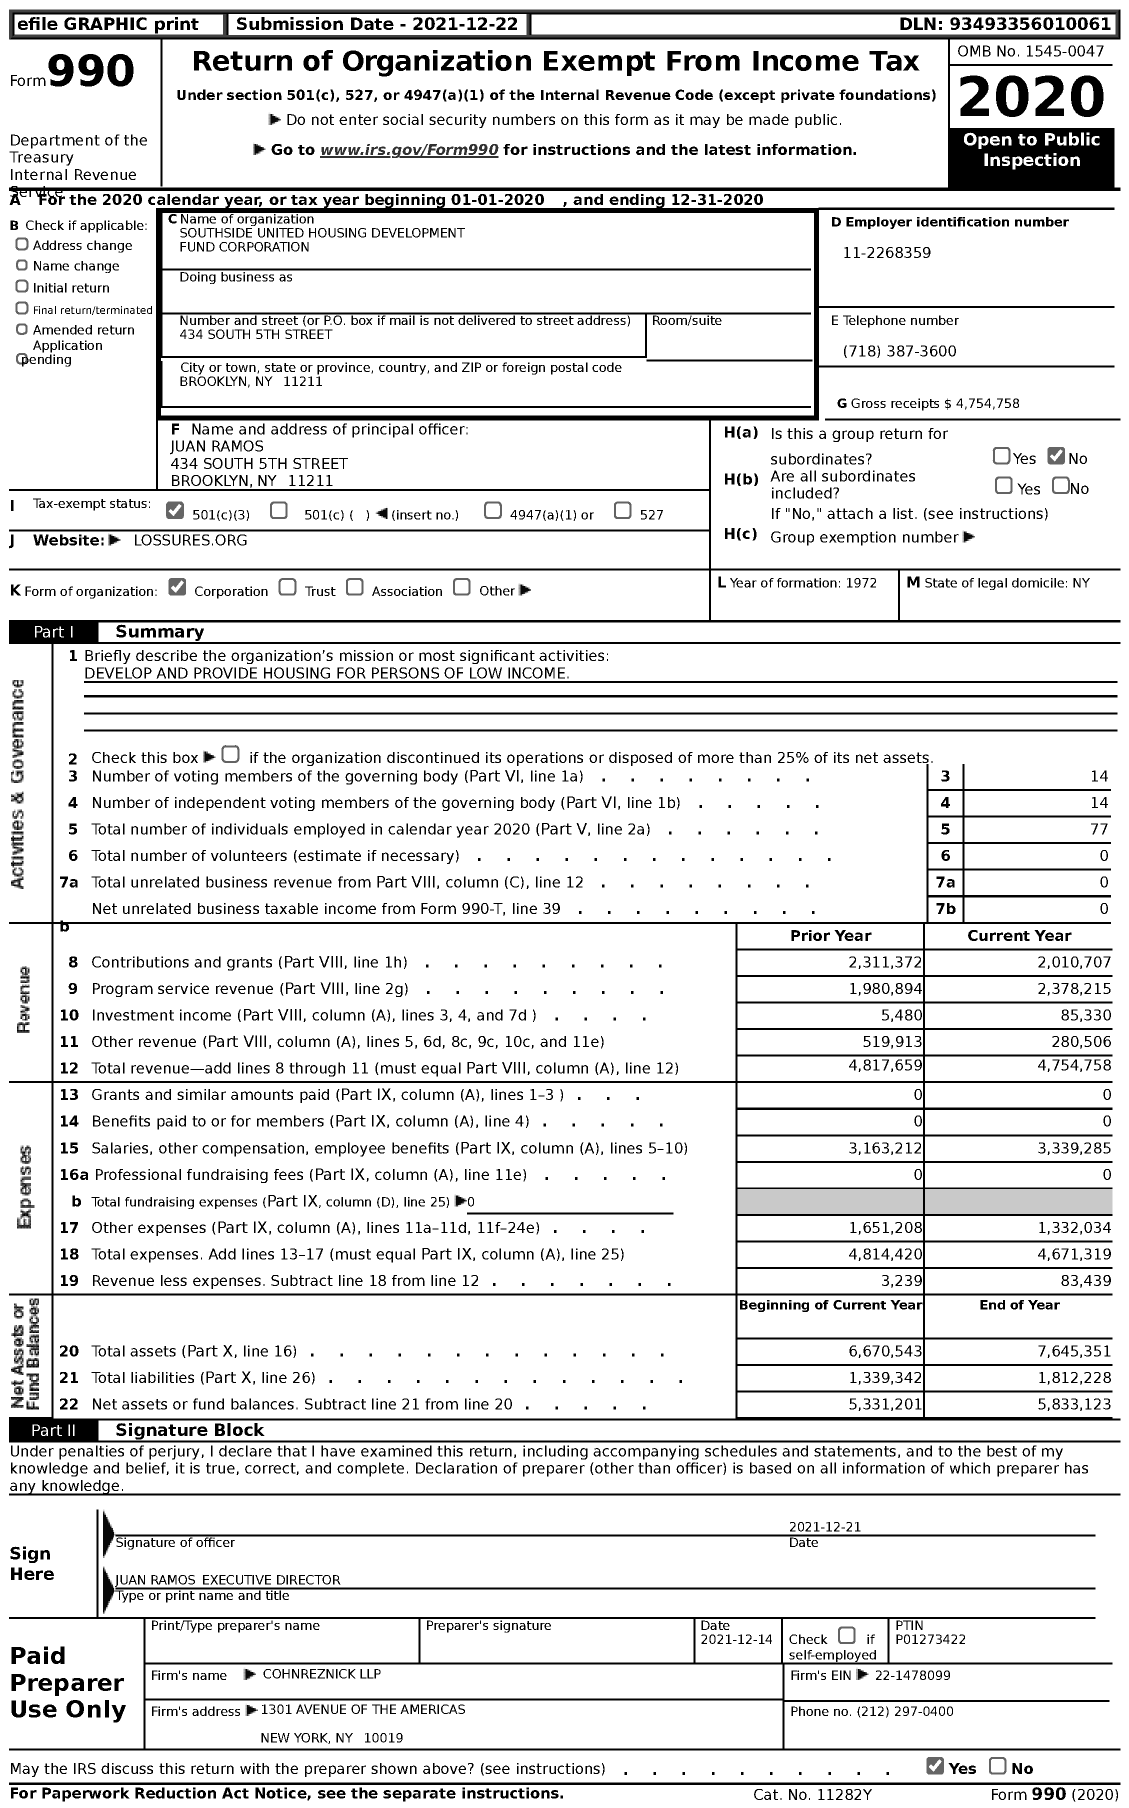 Image of first page of 2020 Form 990 for Southside United Housing Development Fund Corporation